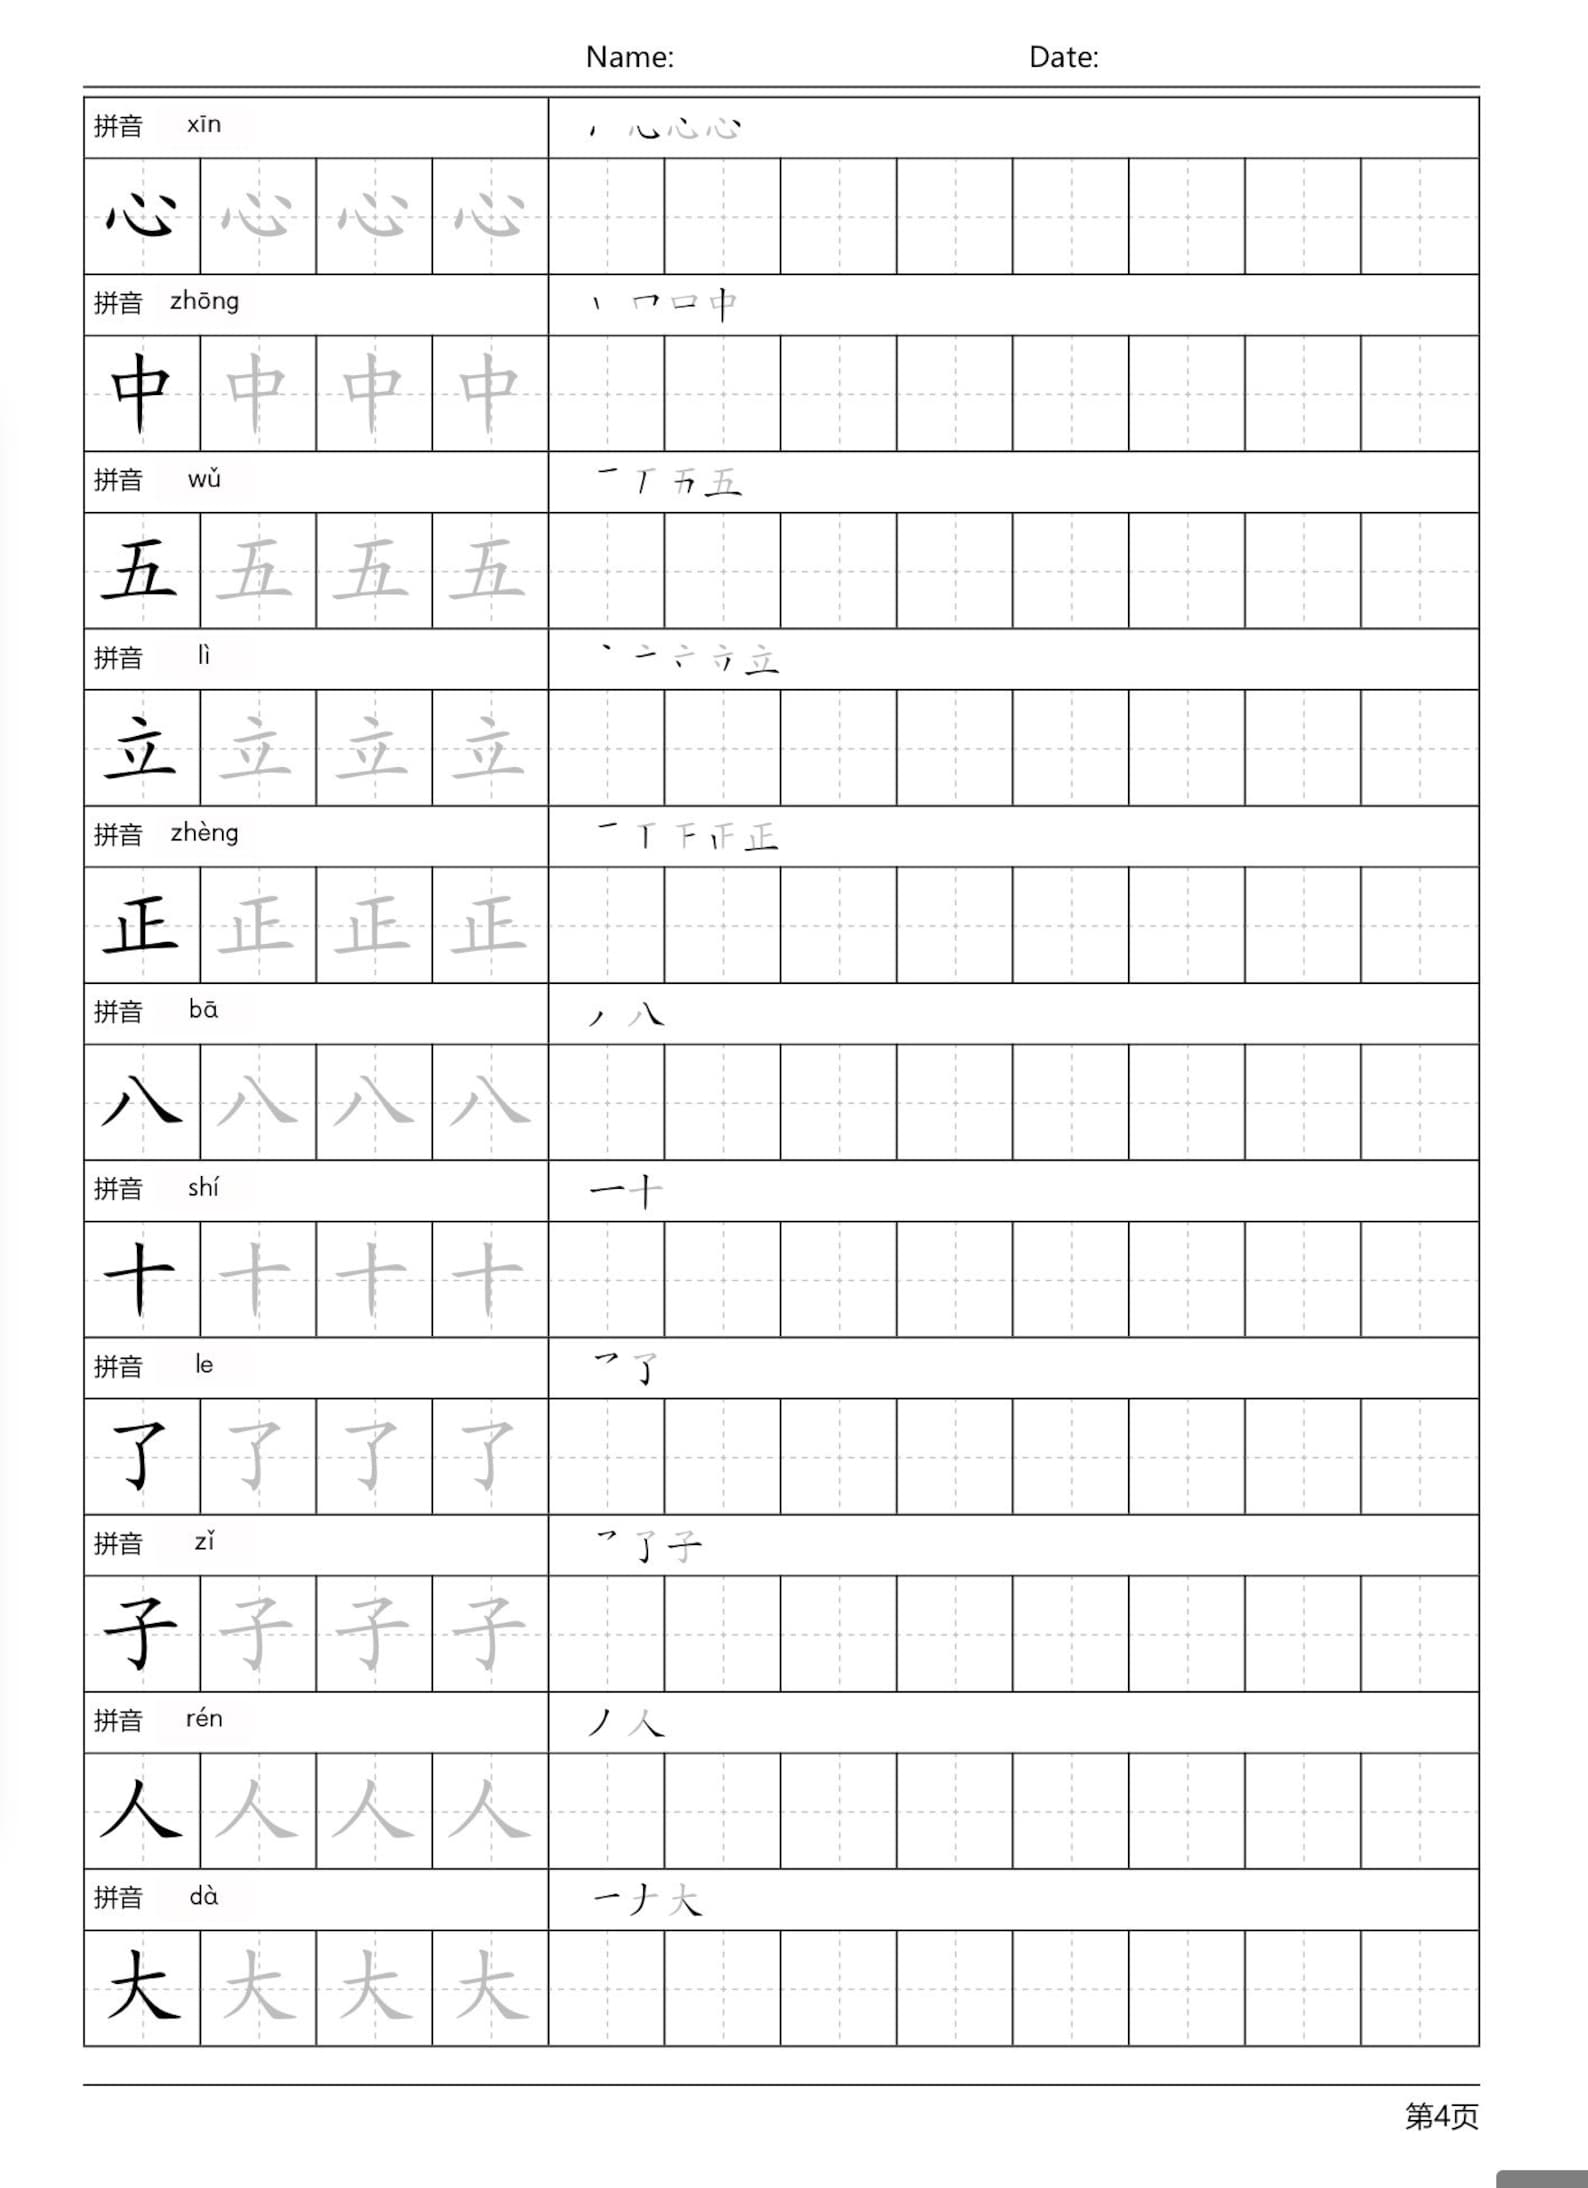 printable-basic-chinese-character-writing-worksheets-stroke-orderpinyin-28-pages-chinese